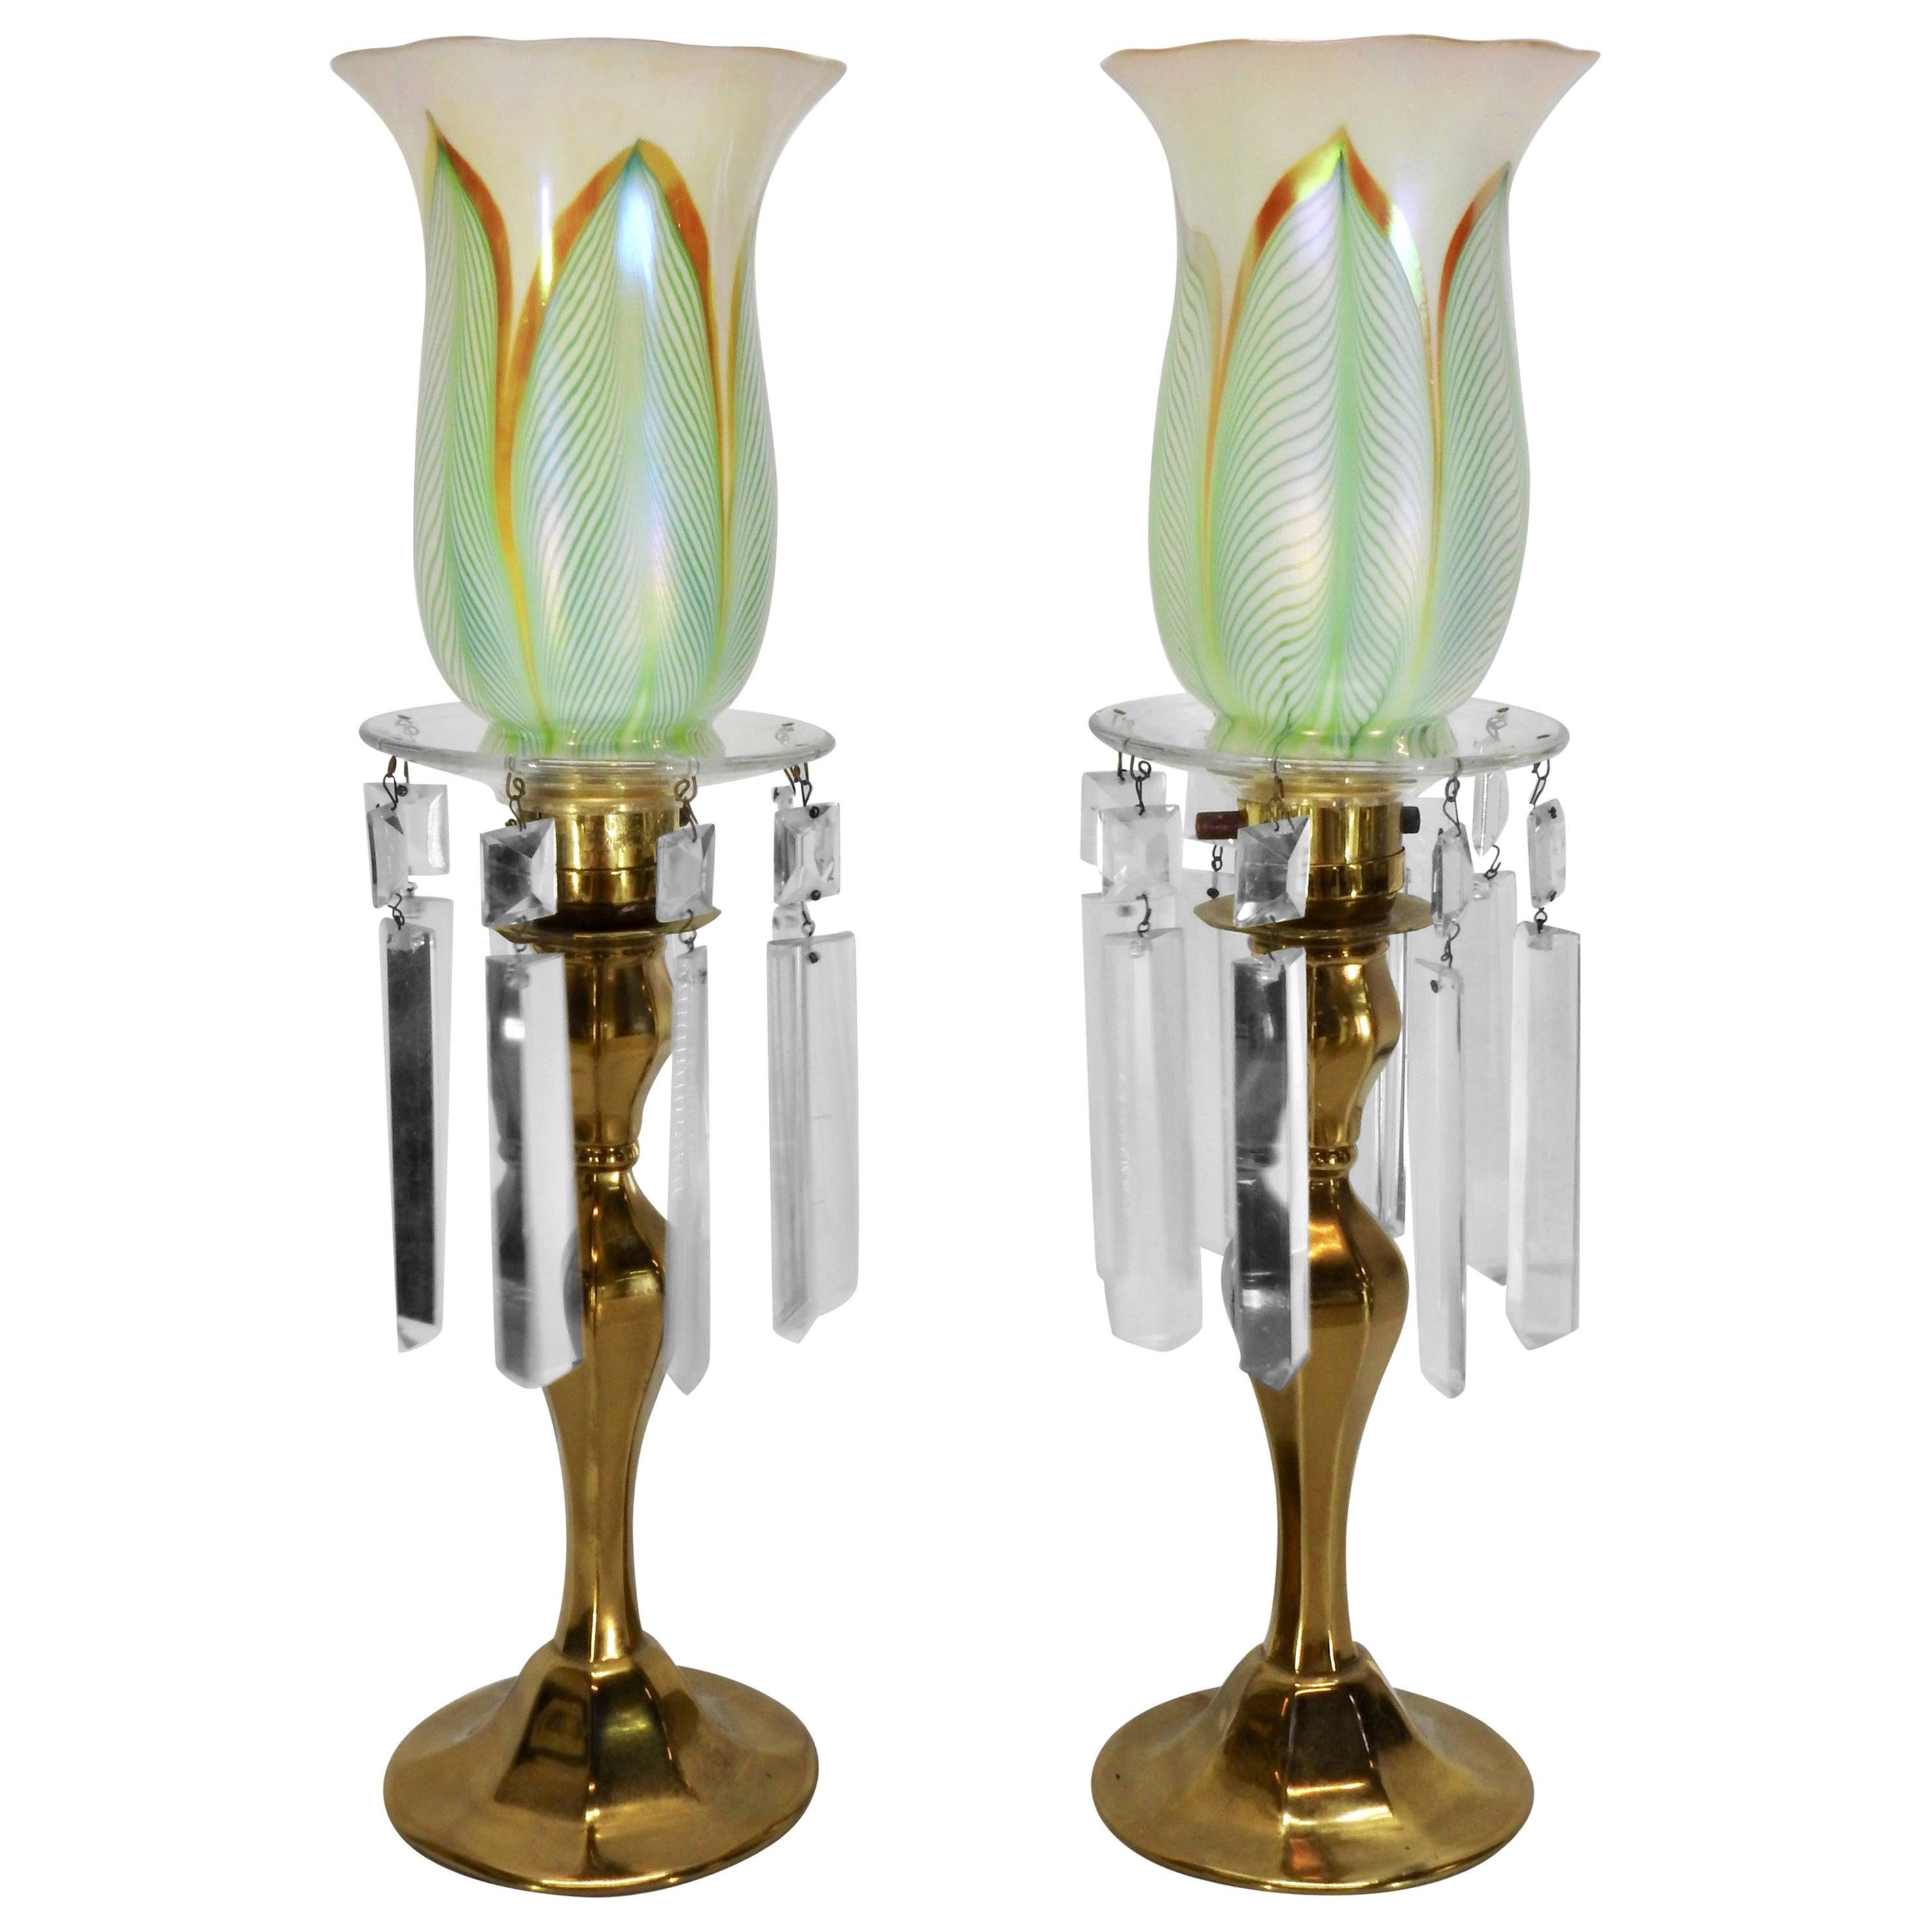 Steuben Pulled Feather Shades on Antique Brass Lamp with Prisms For Sale